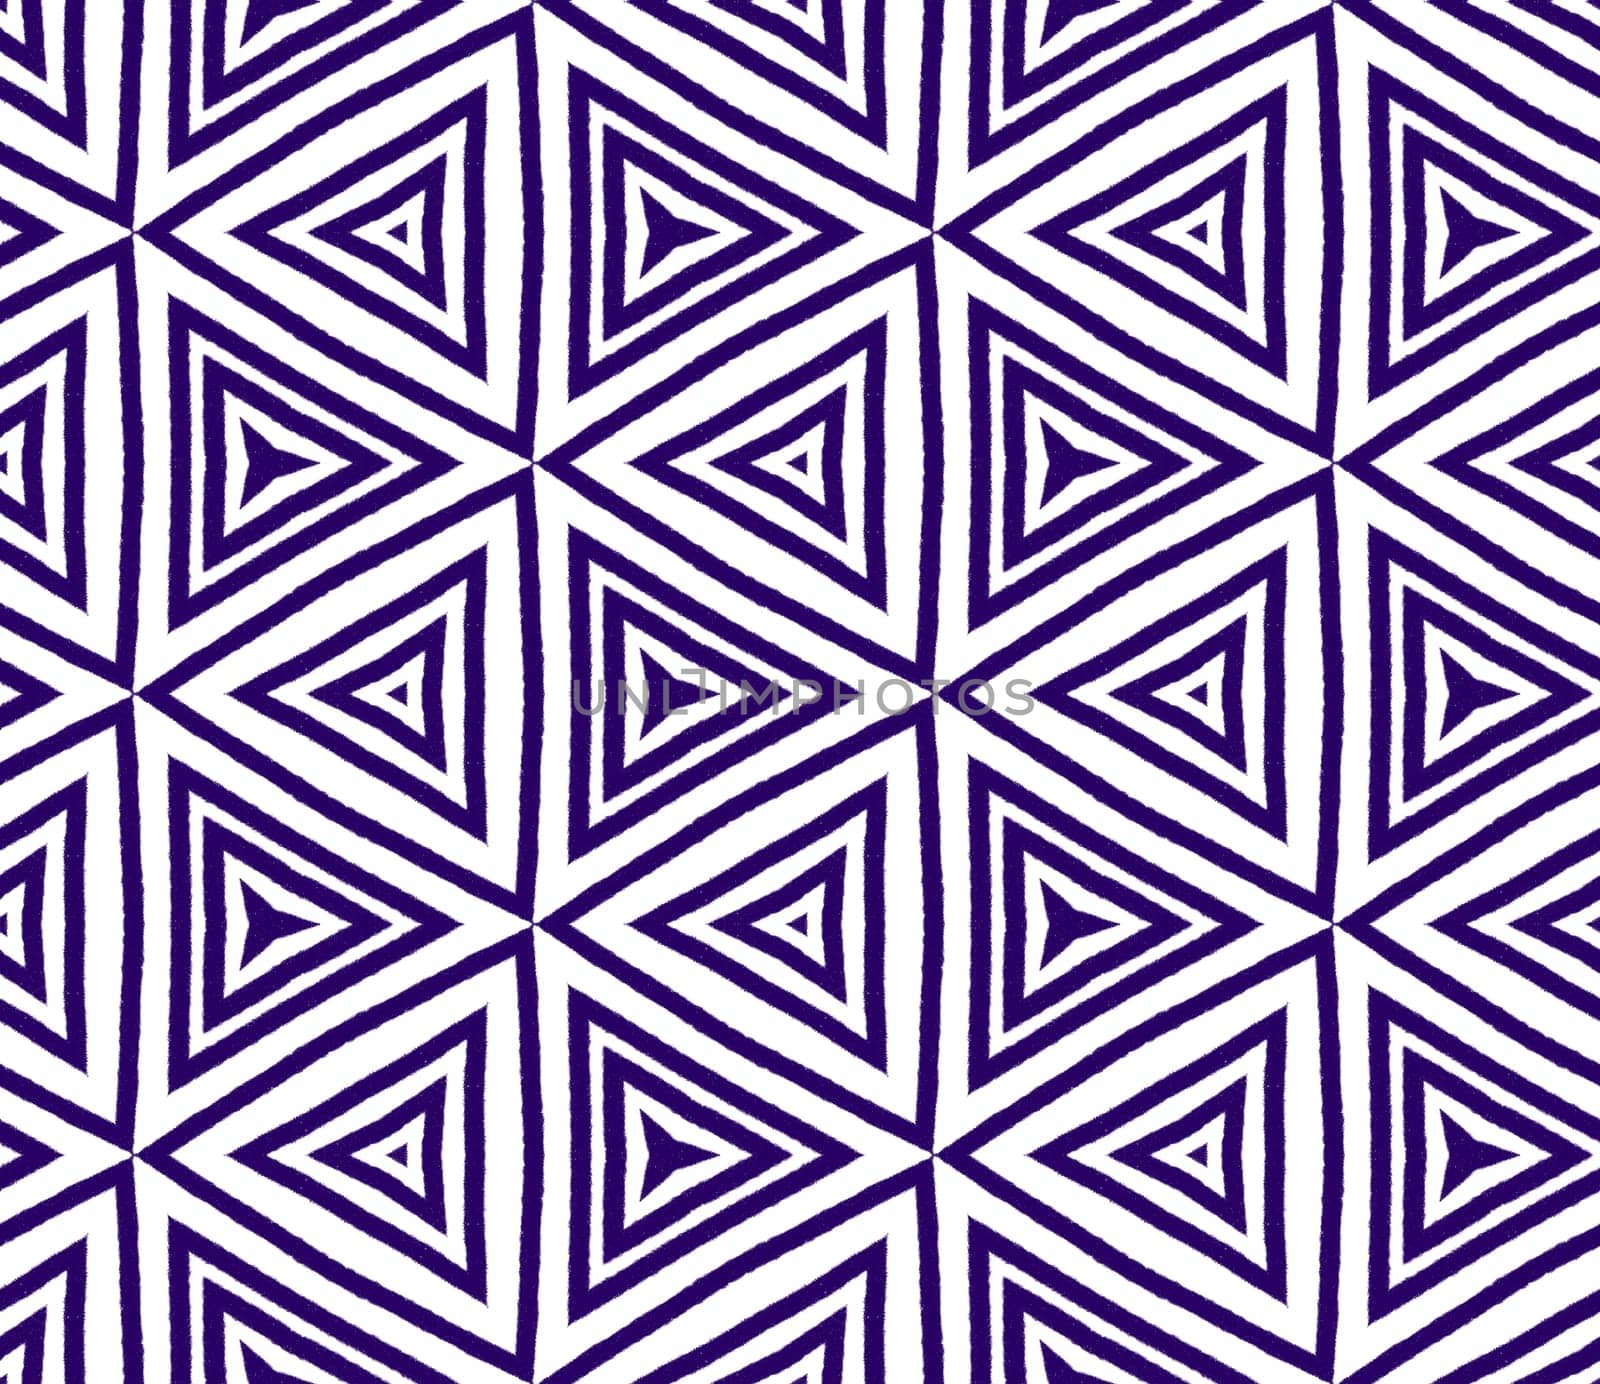 Ethnic hand painted pattern. Purple symmetrical by beginagain